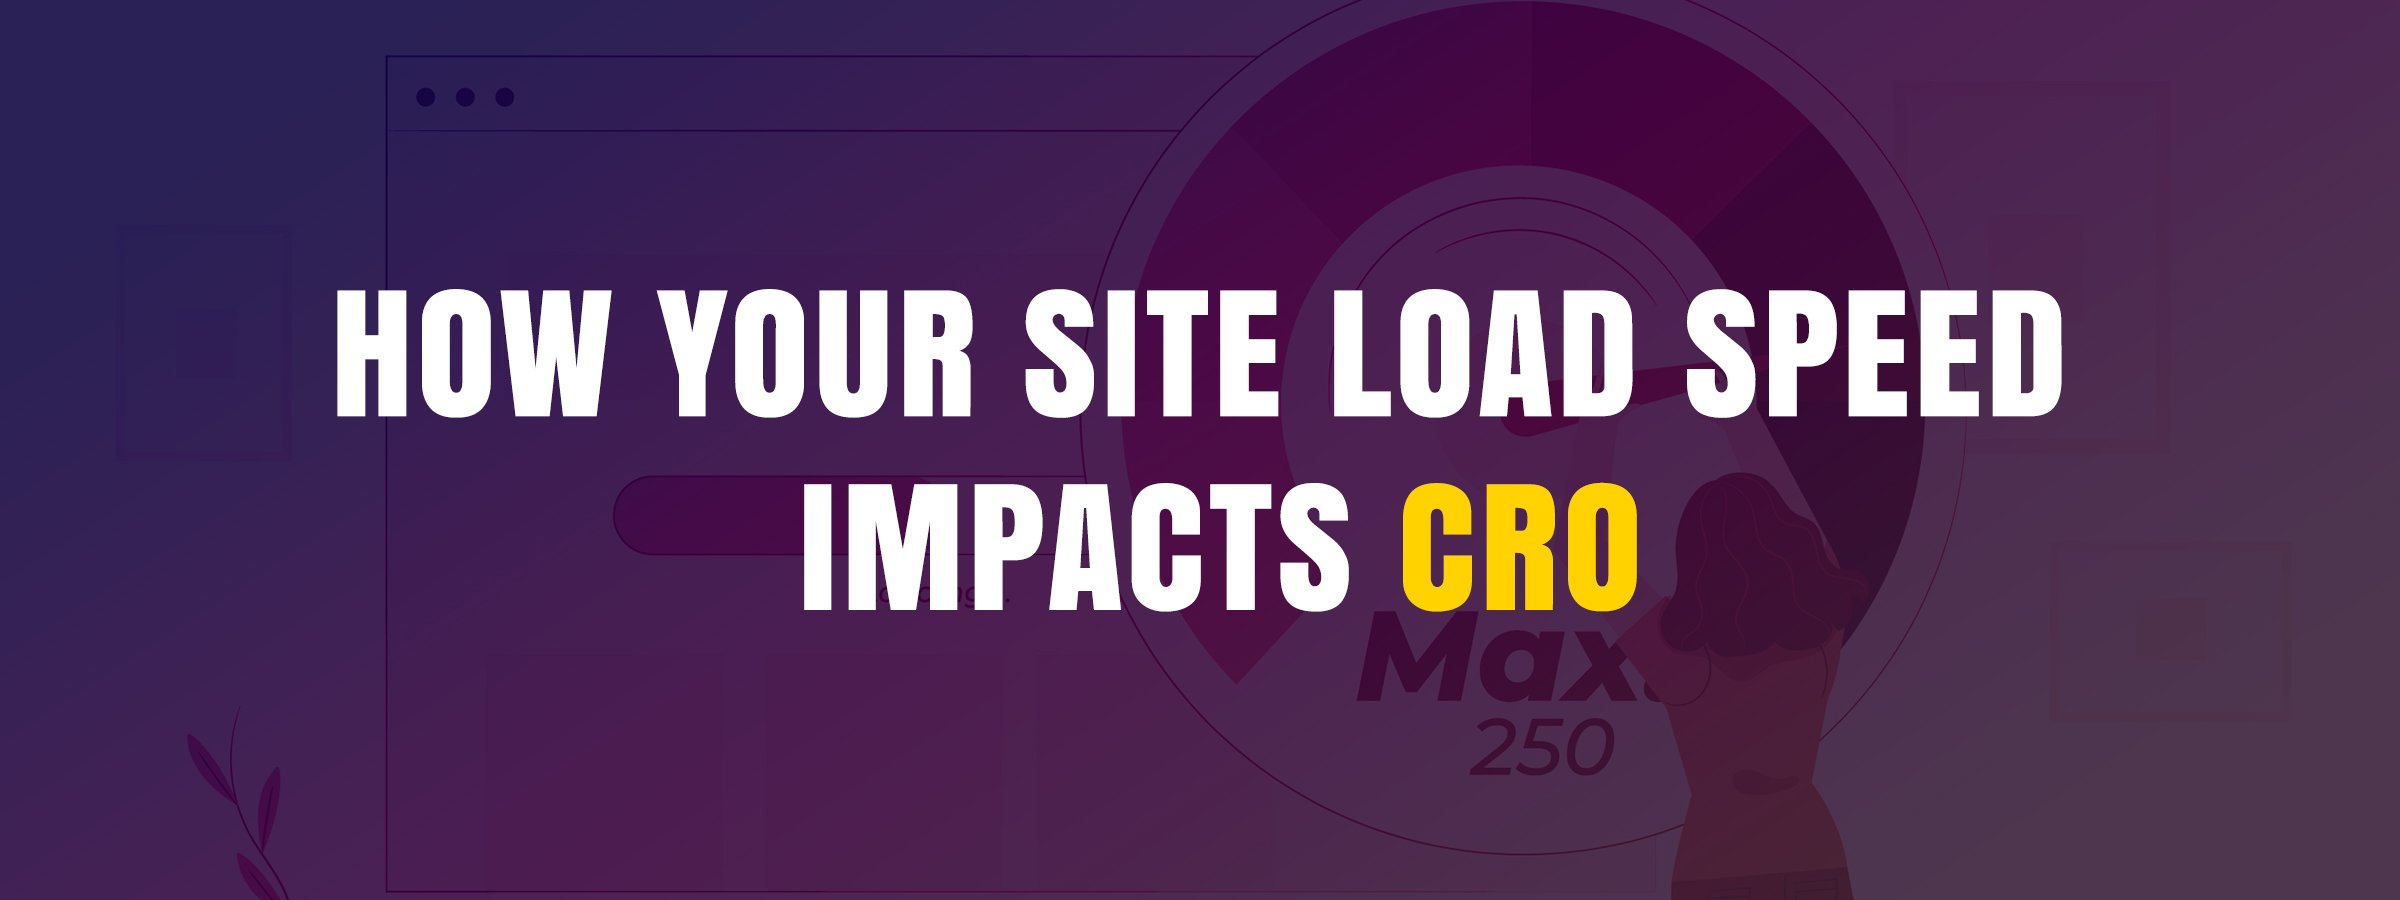 How your site load speed impacts CRO